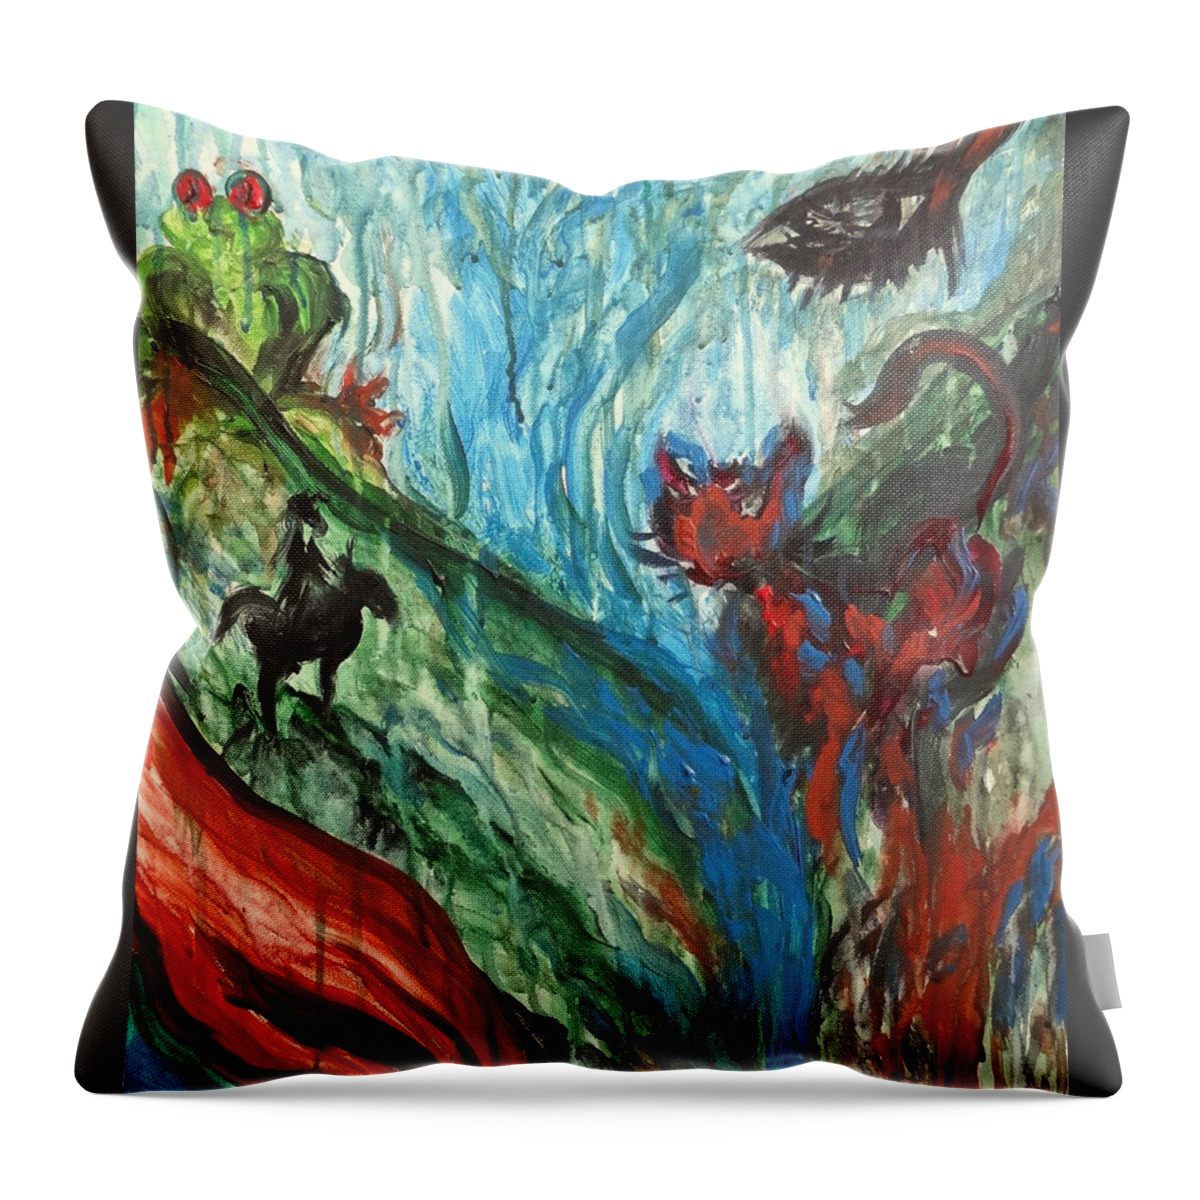 Abstract Throw Pillow featuring the painting Wild Periscope Collaboration by Michelle Pier